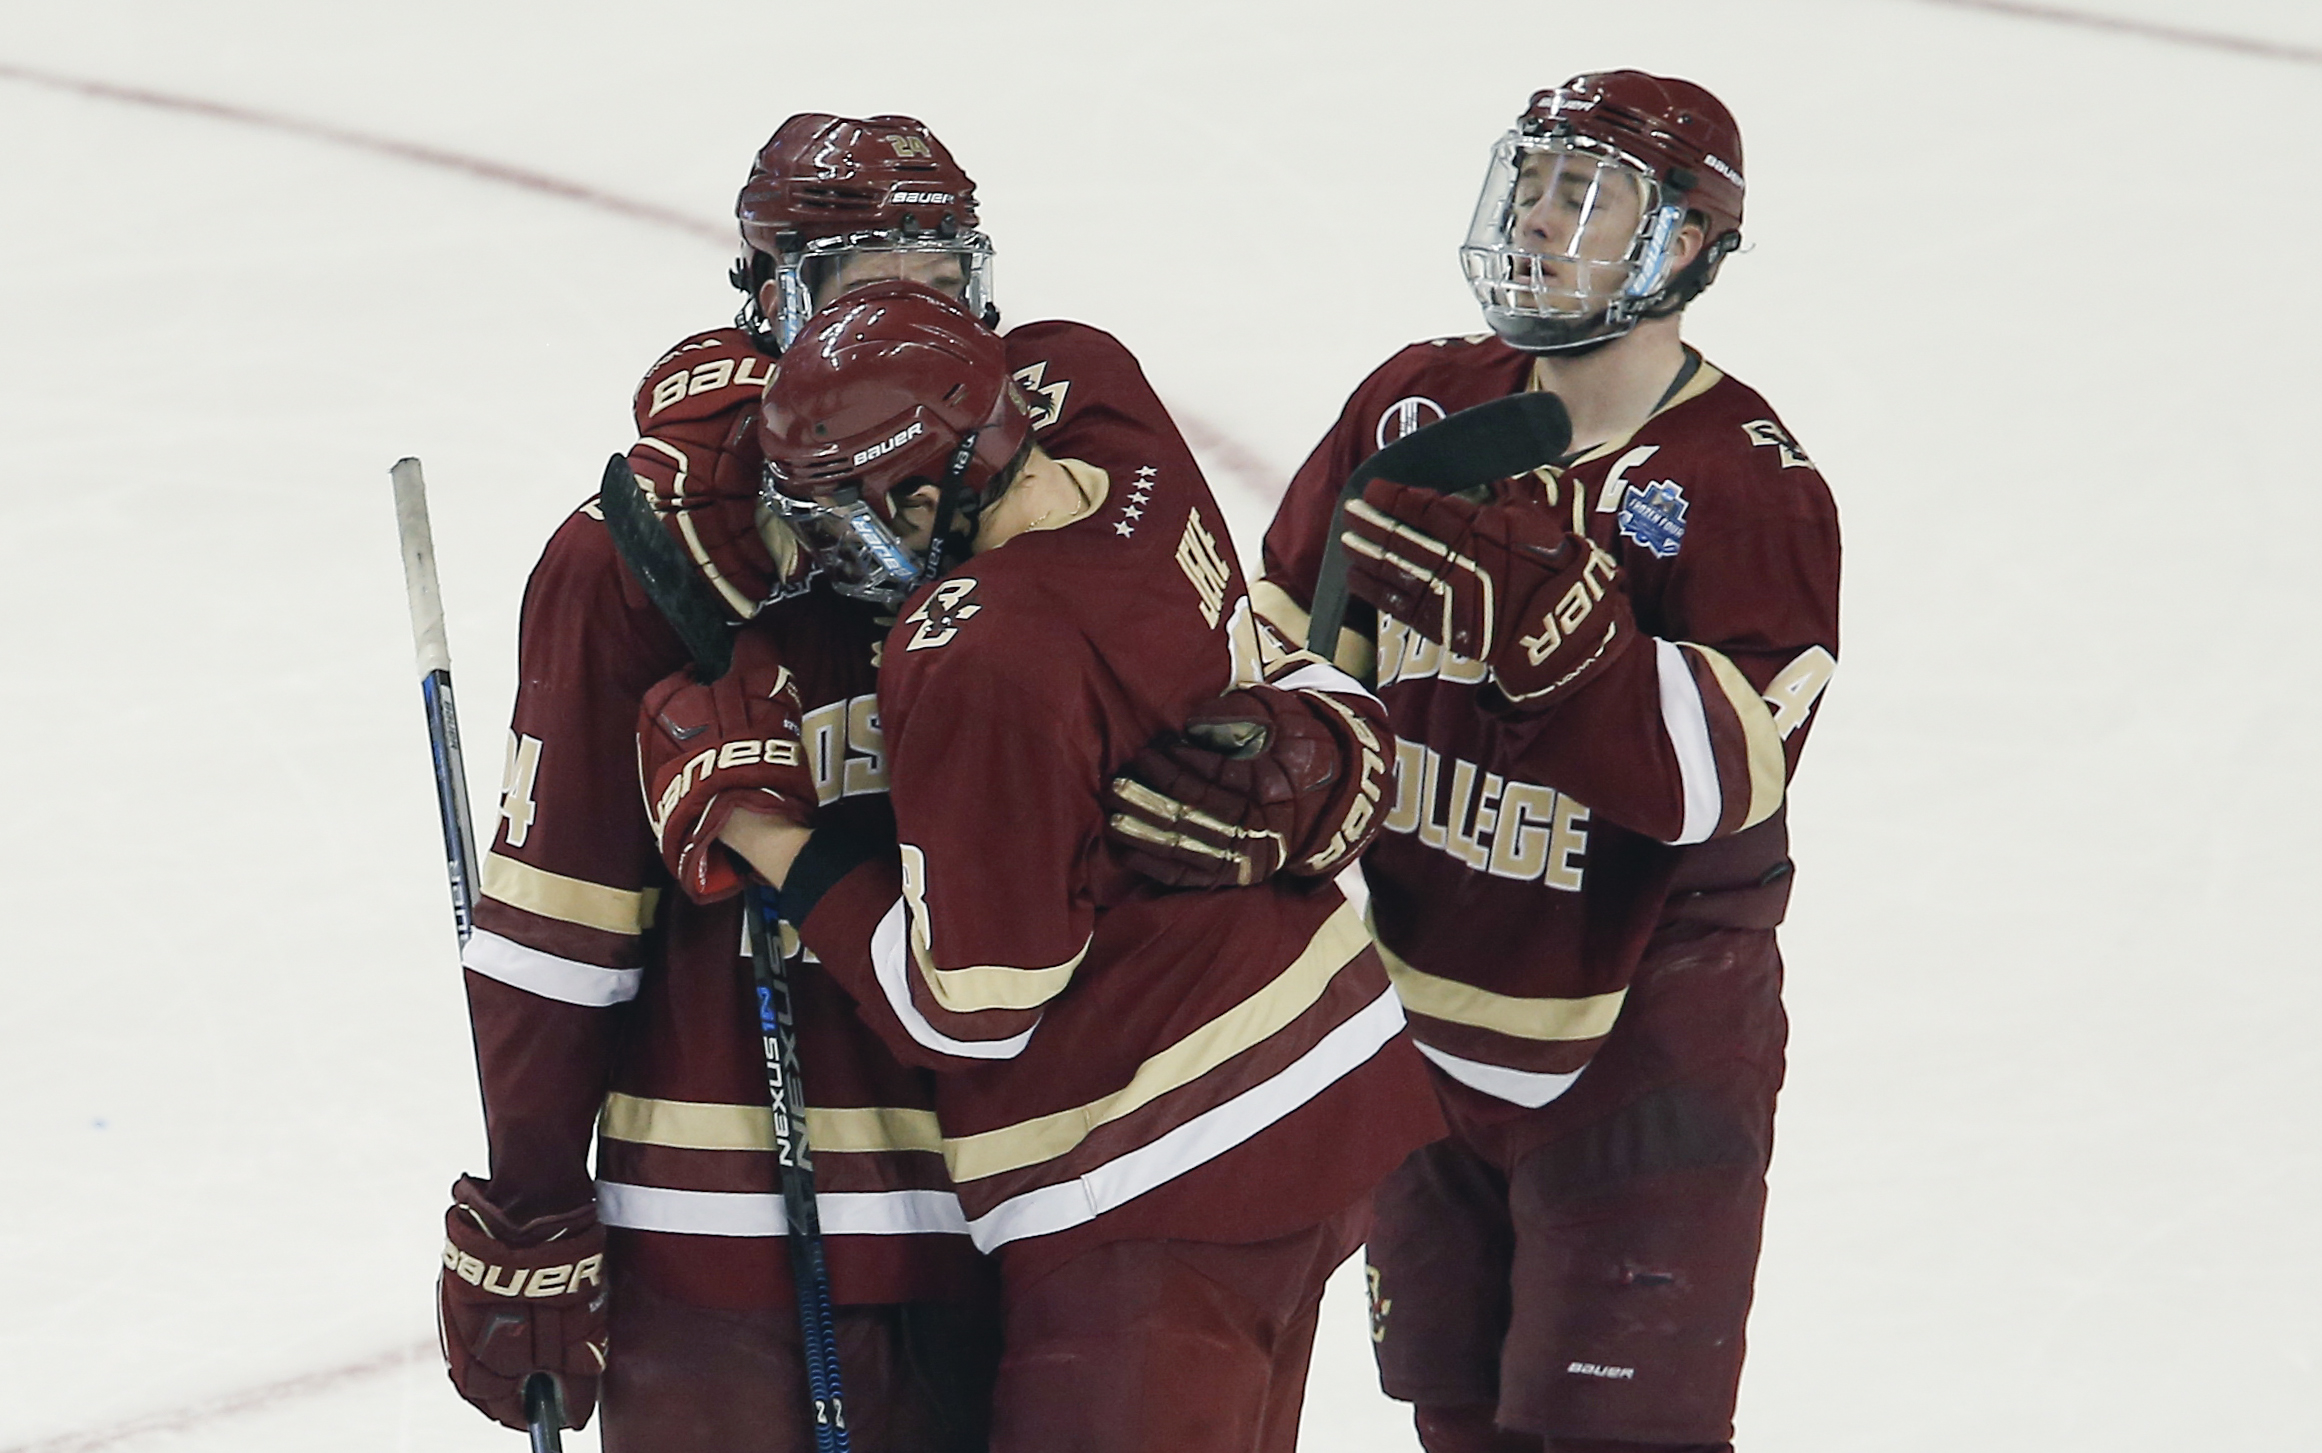 Watch Boston College at Quinnipiac Stream college hockey live - How to Watch and Stream Major League and College Sports